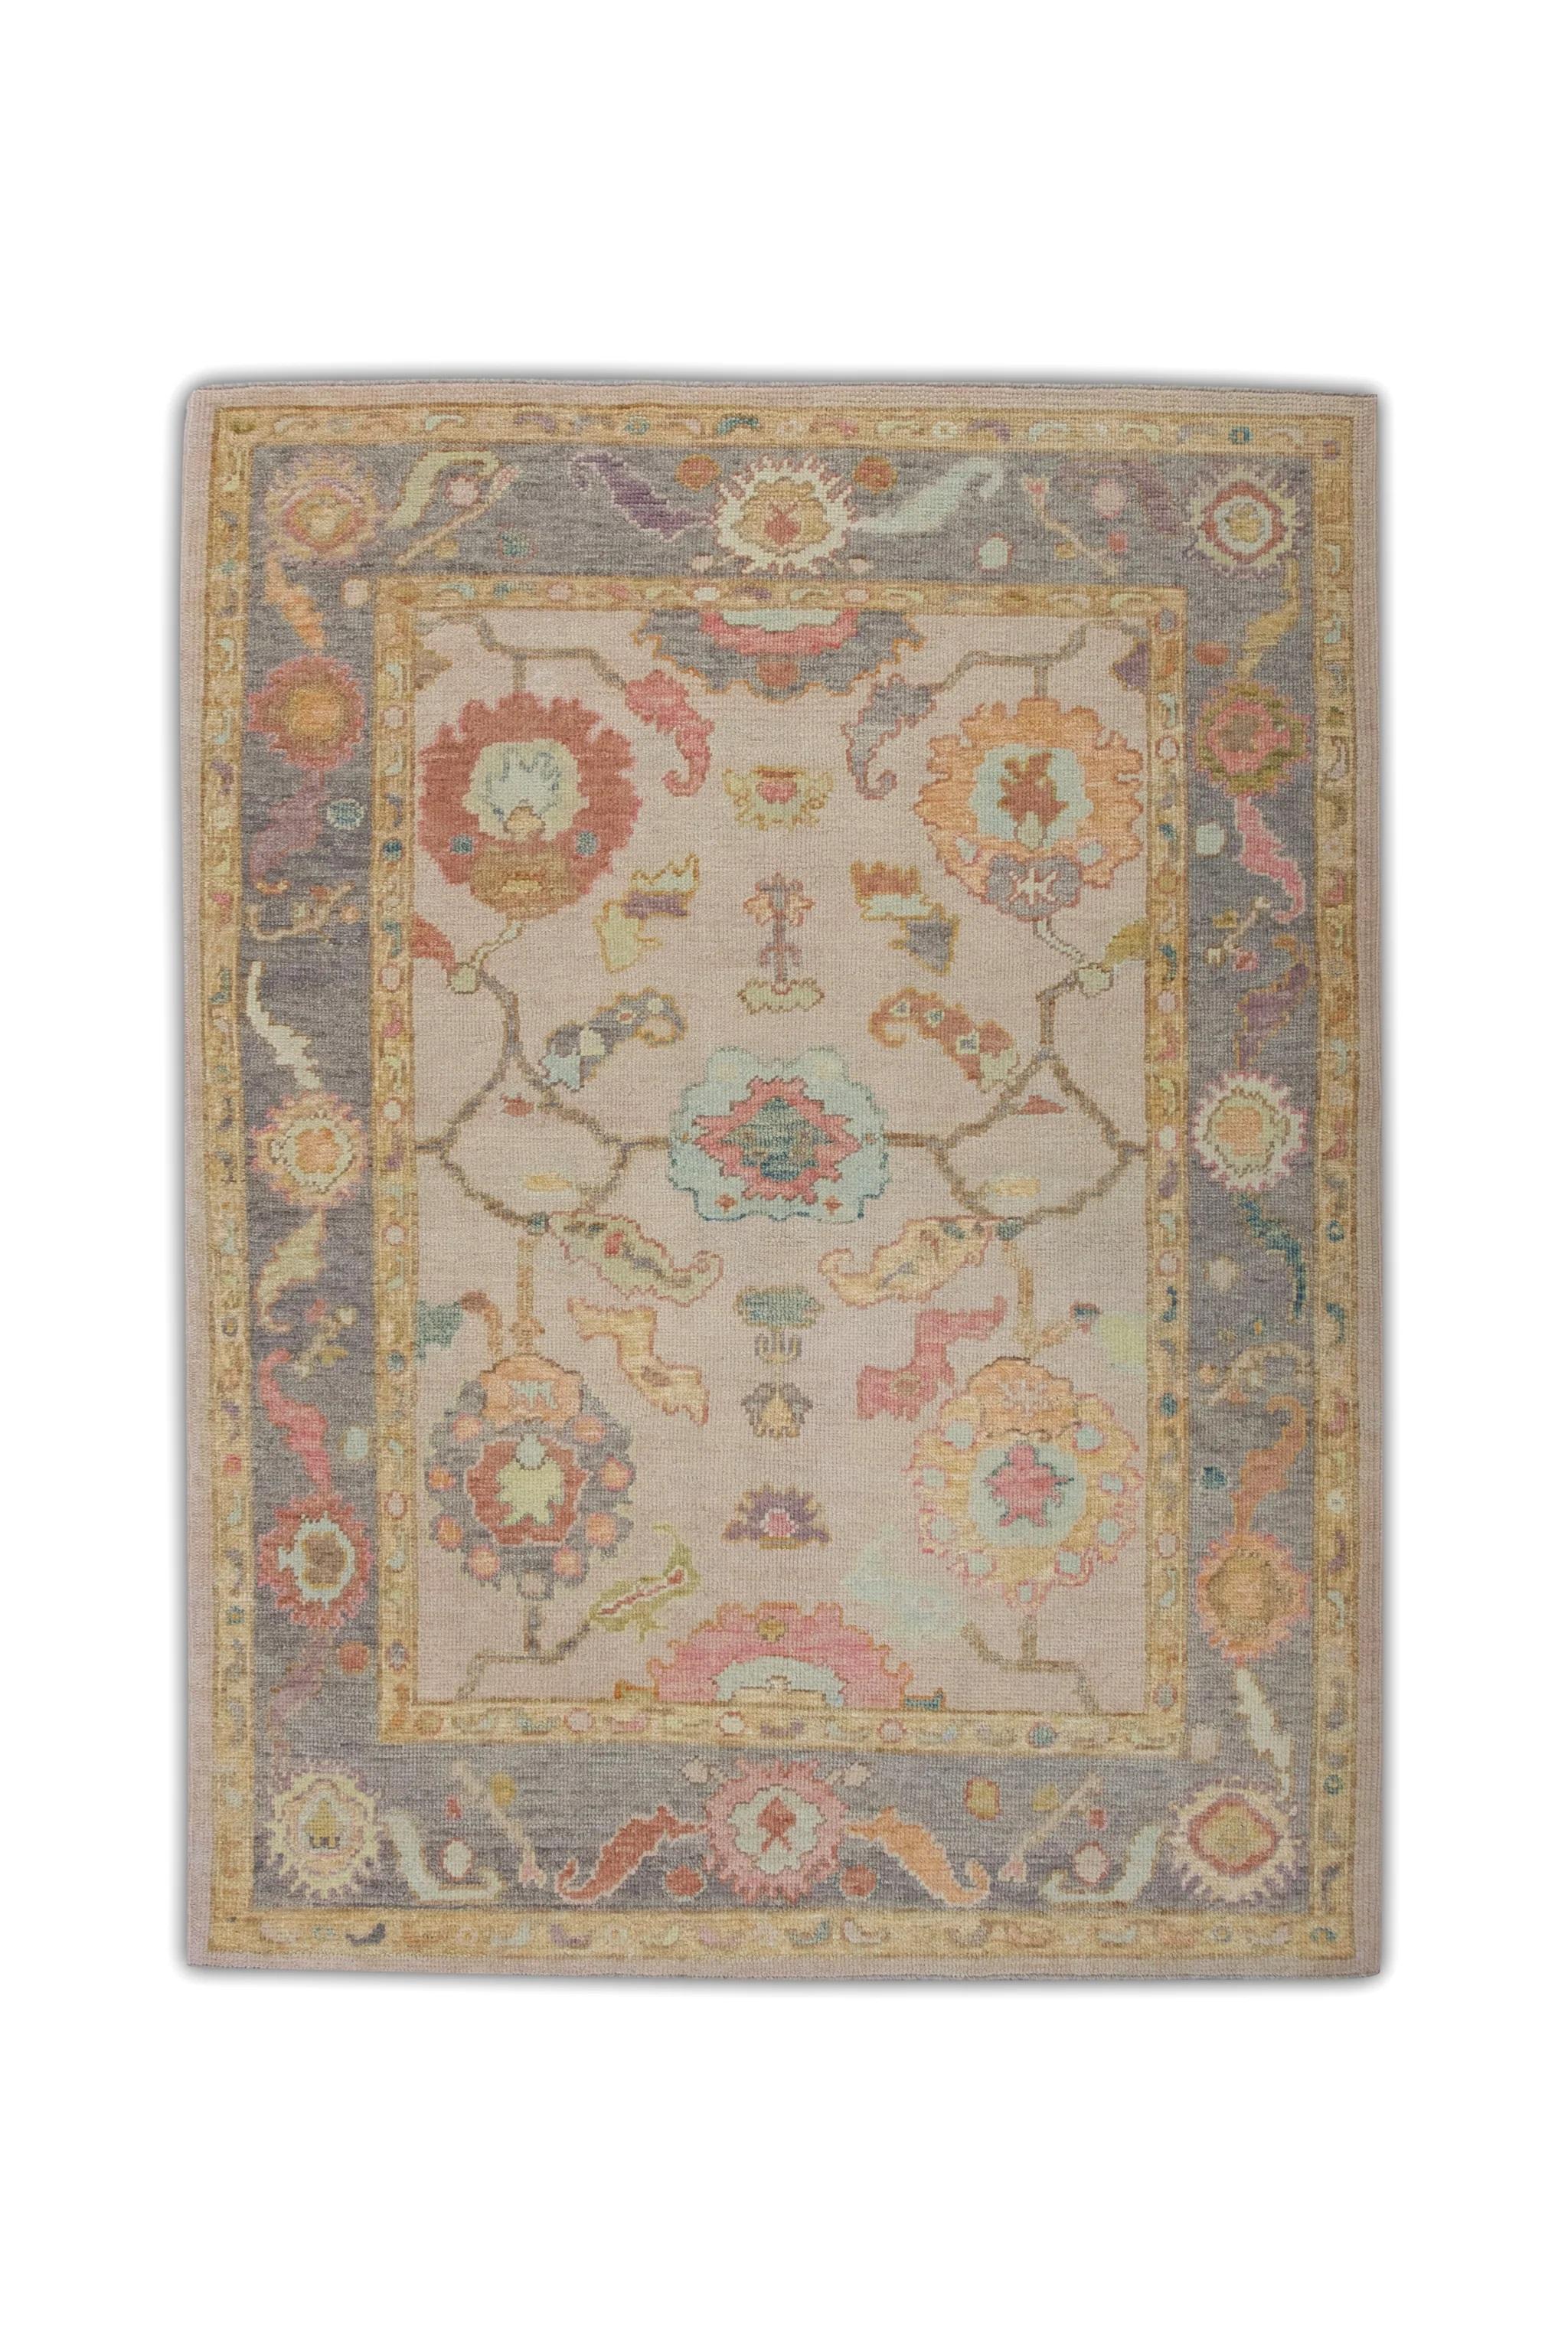 Floral Handwoven Wool Turkish Oushak Rug in Soft Pink and Purple 5' x 6'9